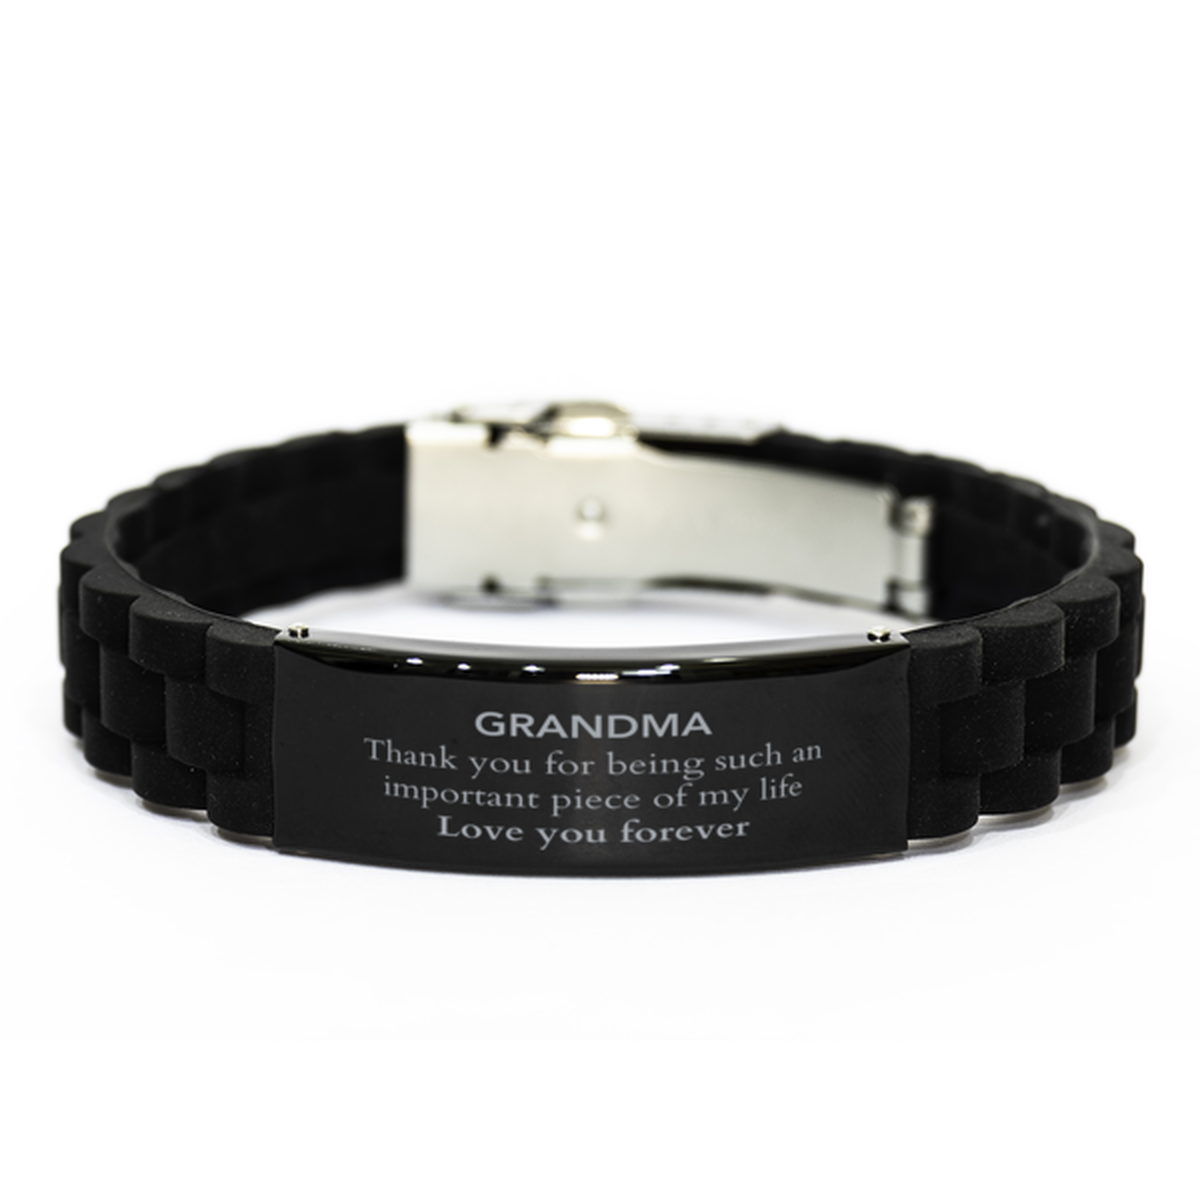 Appropriate Grandma Black Glidelock Clasp Bracelet Epic Birthday Gifts for Grandma Thank you for being such an important piece of my life Grandma Christmas Mothers Fathers Day